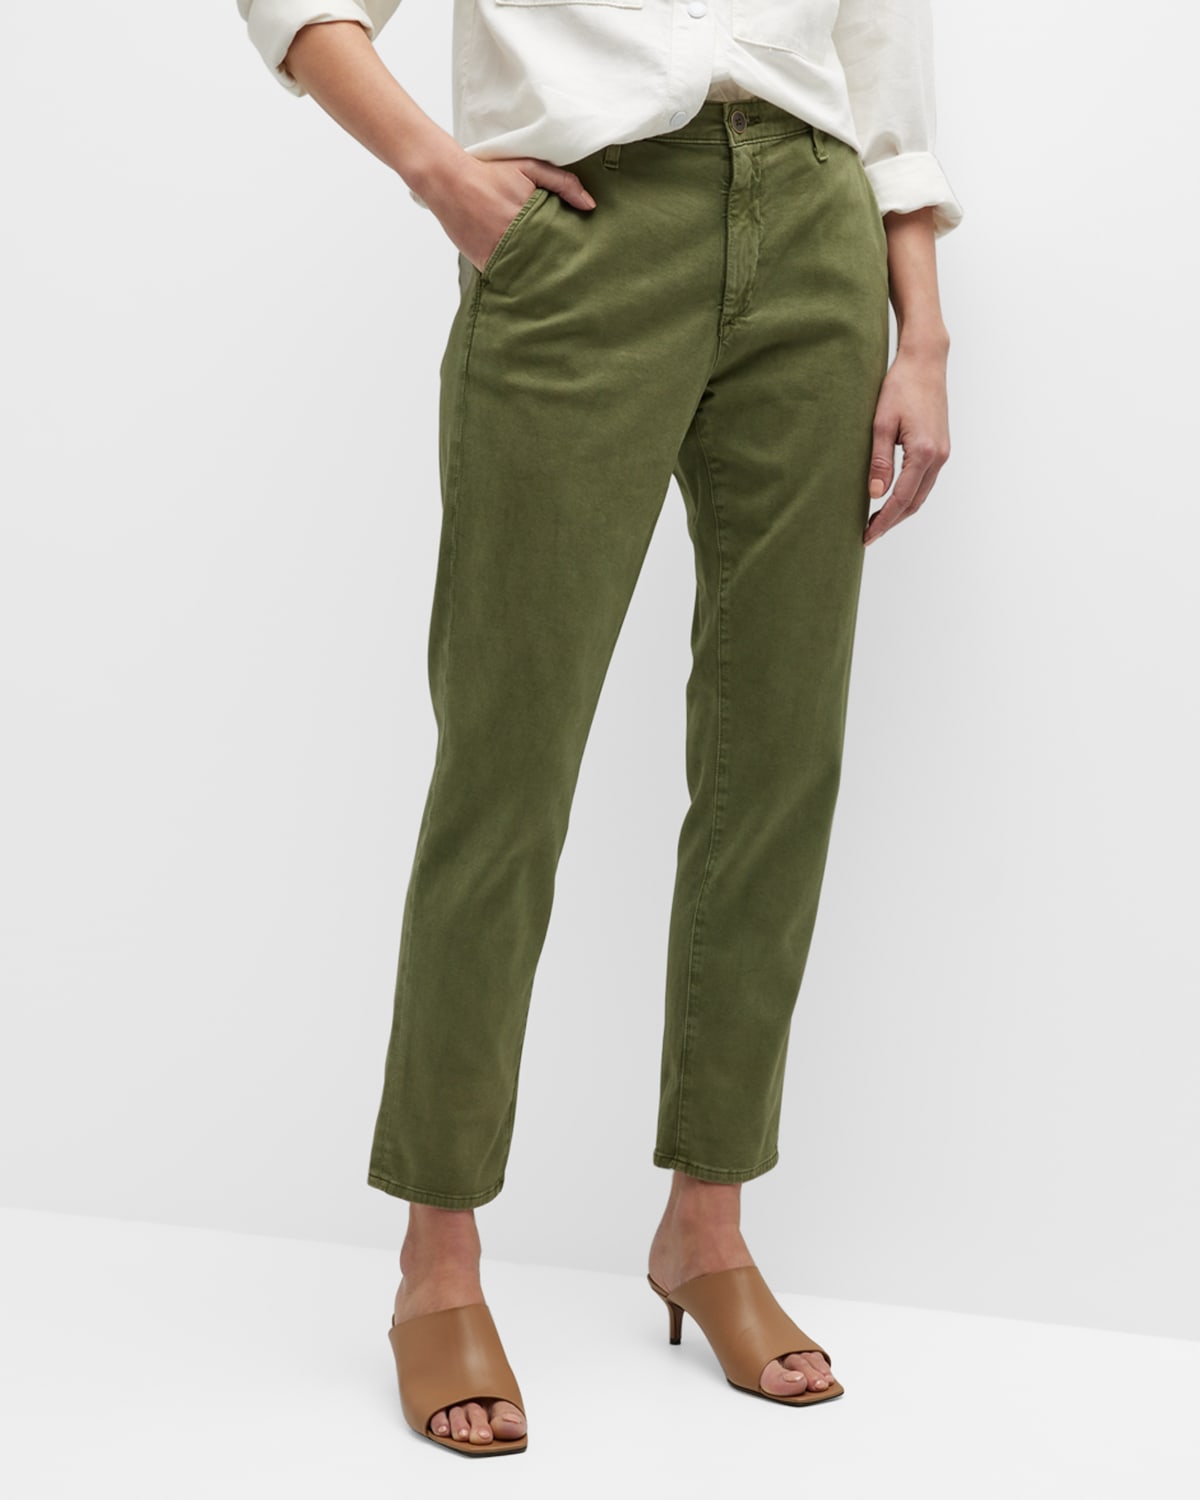 The Caden Tailored Denim Trousers